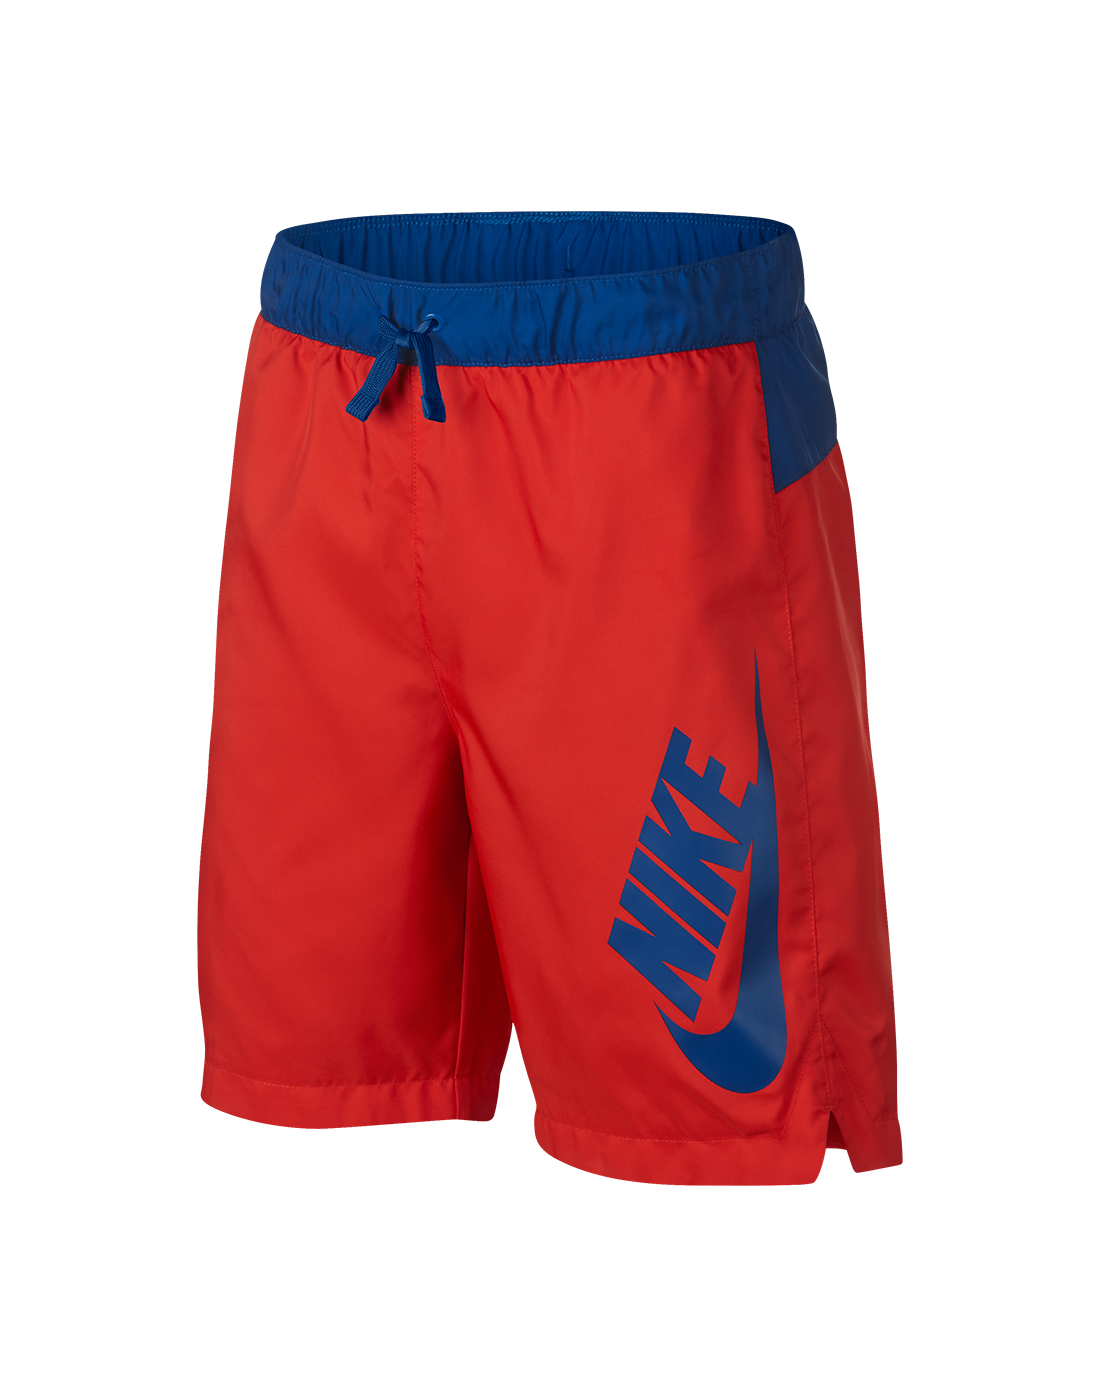 Boy's Red & Blue Nike Shorts | Life Style Sports